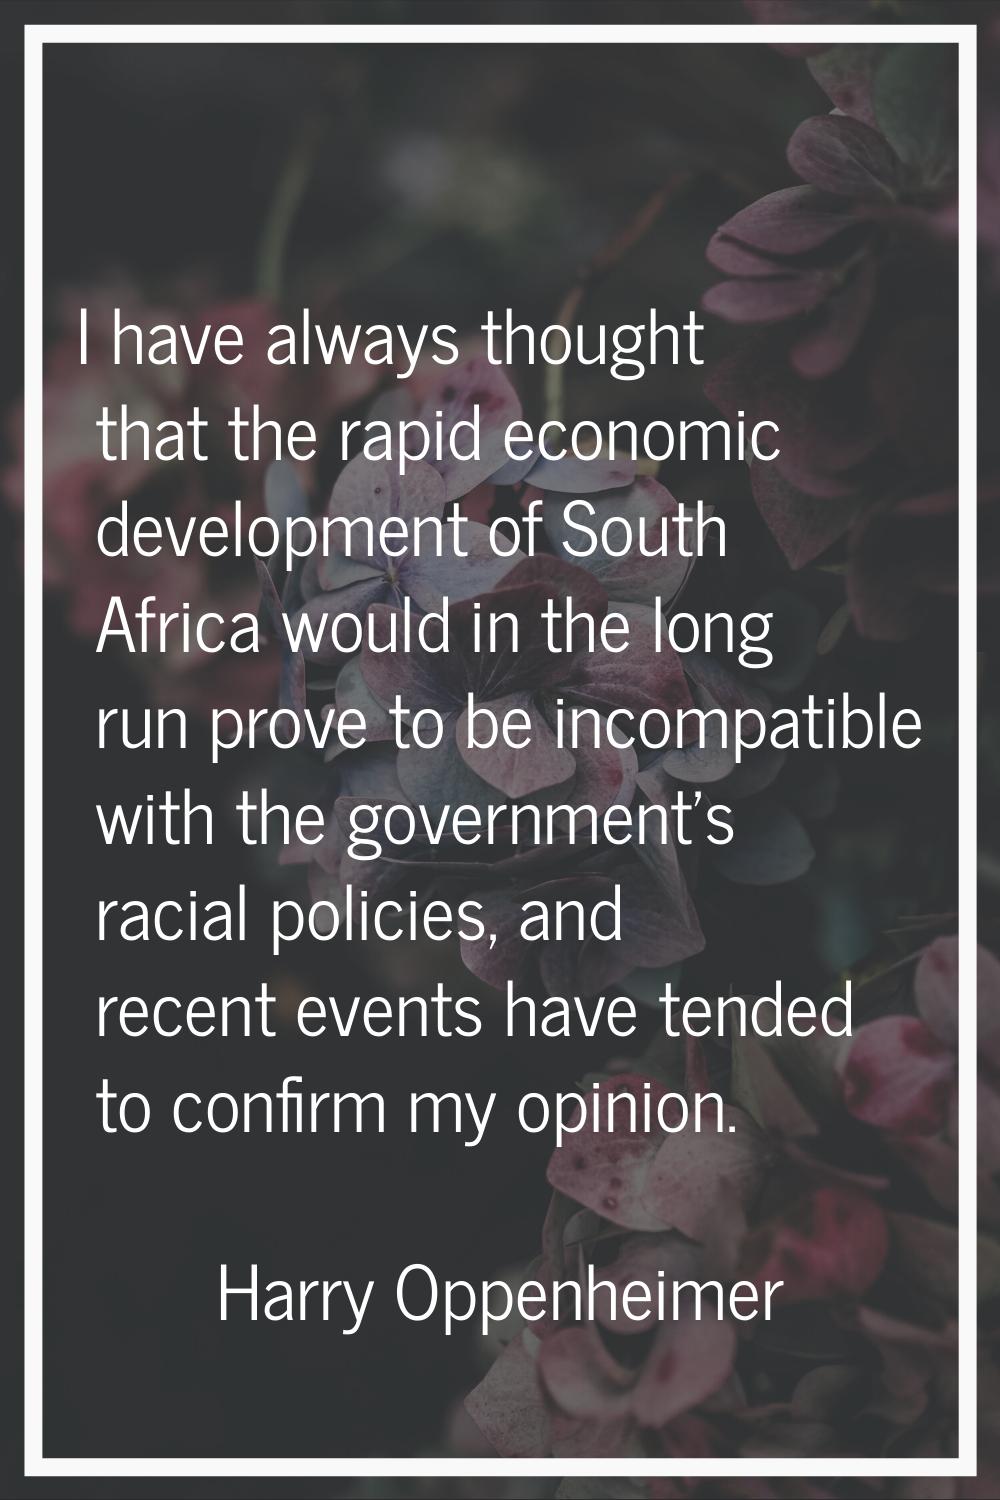 I have always thought that the rapid economic development of South Africa would in the long run pro